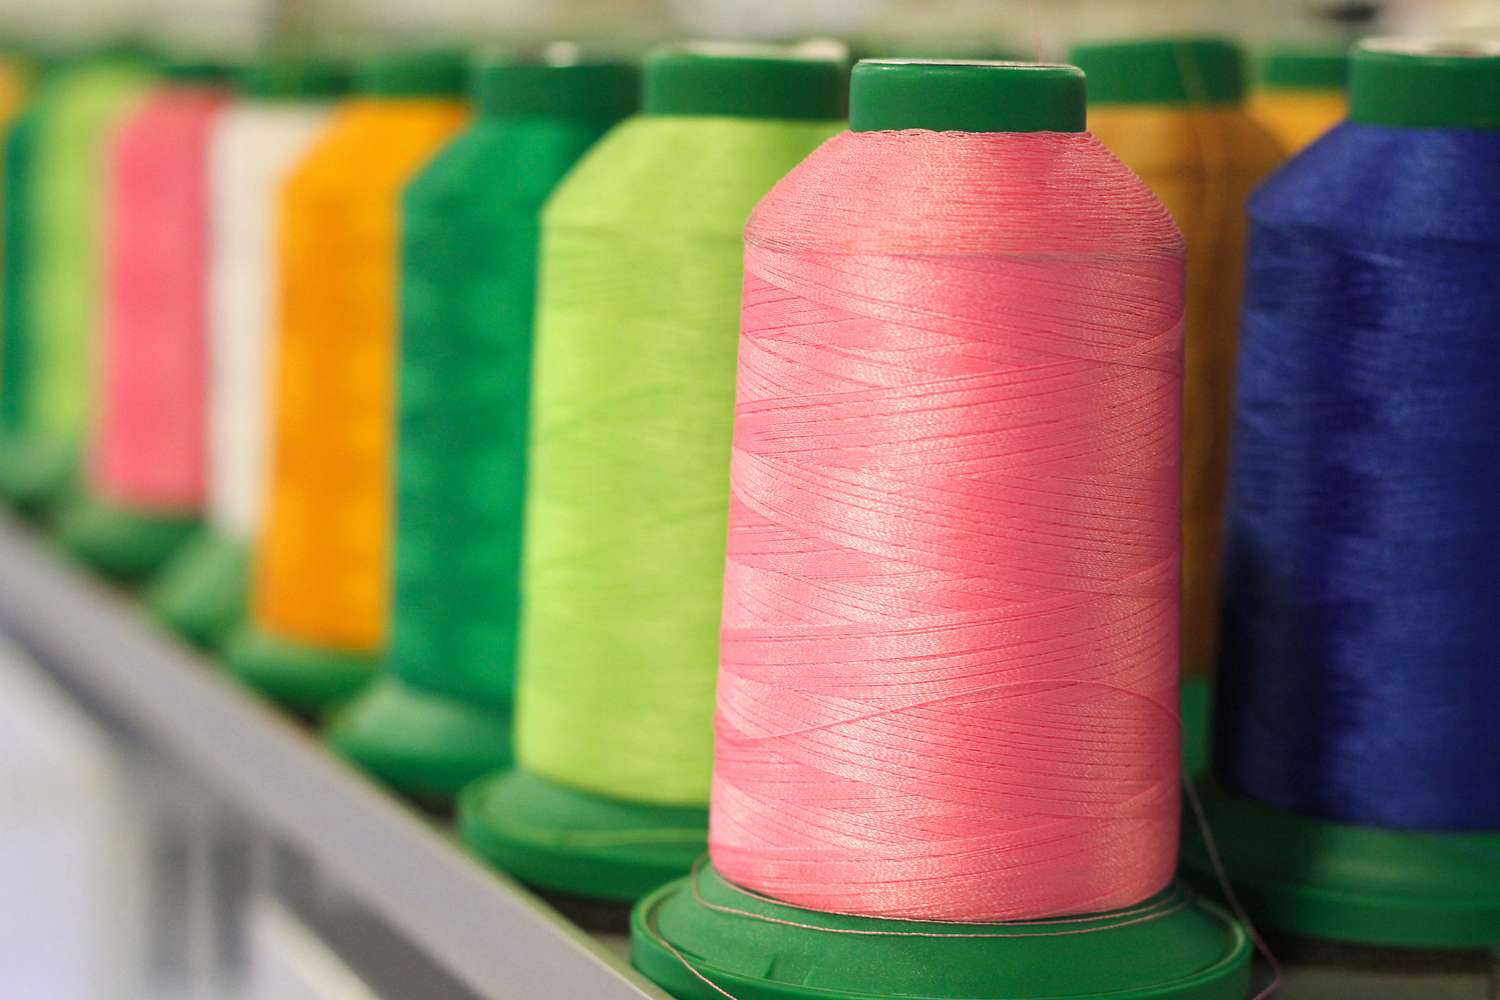 Rows of colorful thread spools